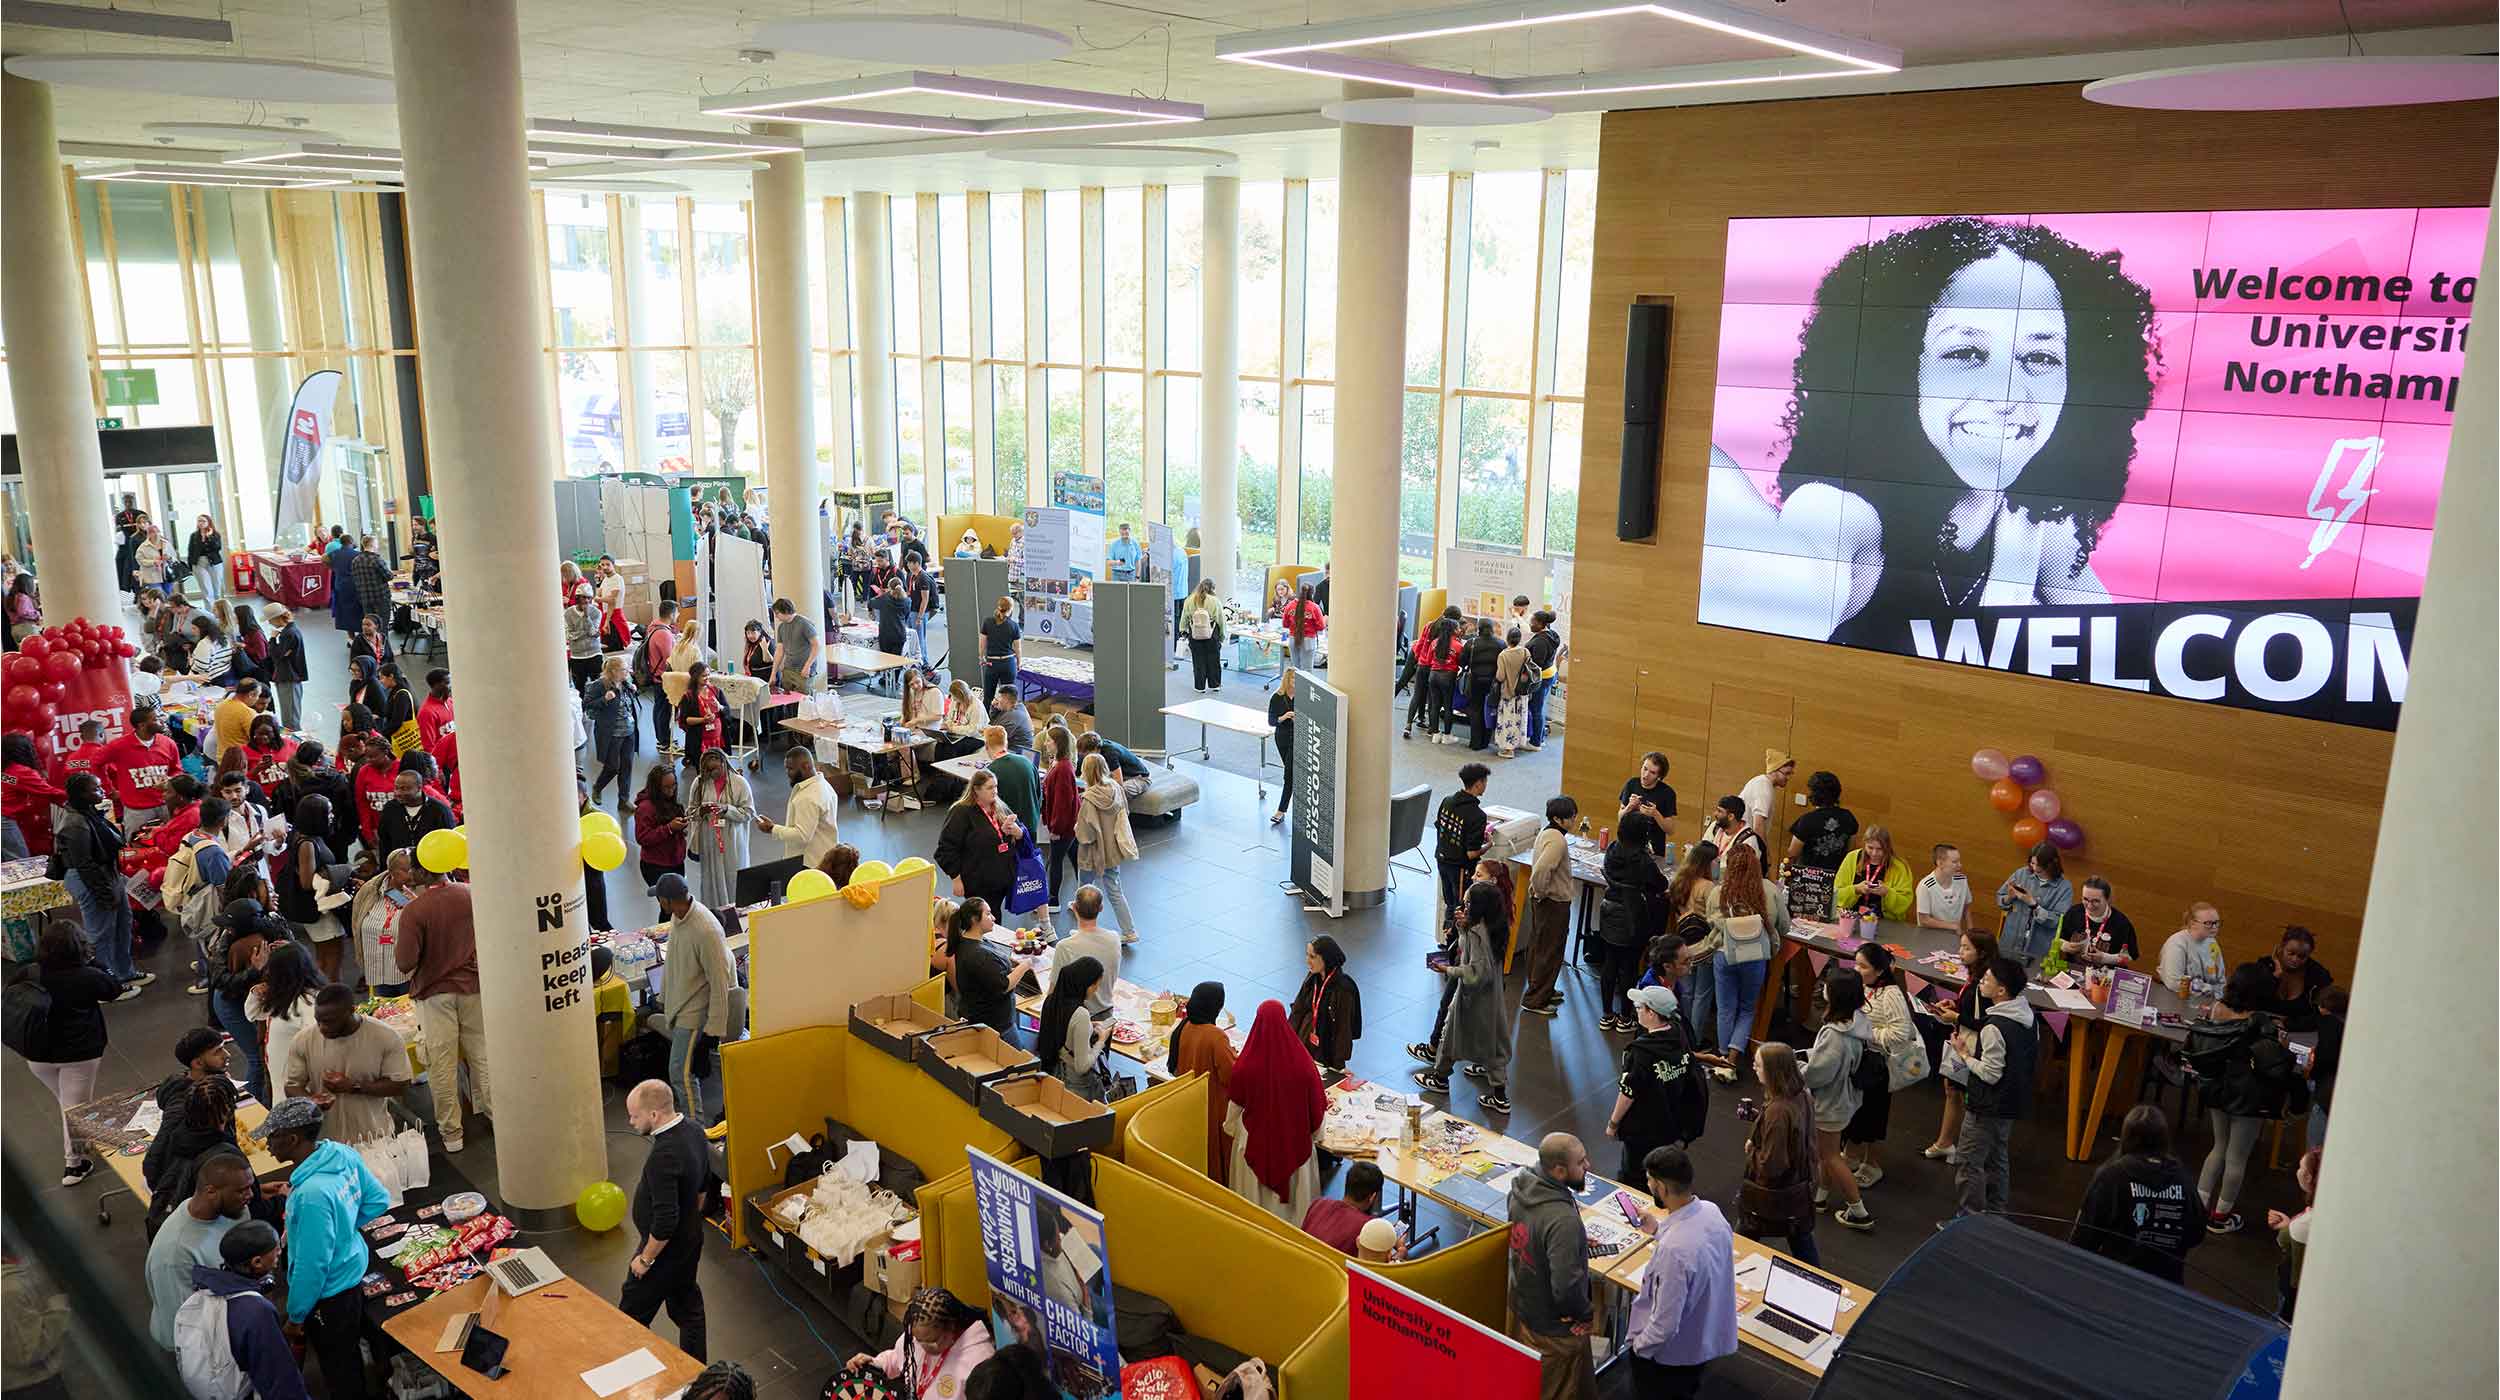 New students visit a Student Union Societies Fair at the University of Northampton. There are approximately 20 advice and information desks - one for each university society. A large display screen on the wall displays a welcome message